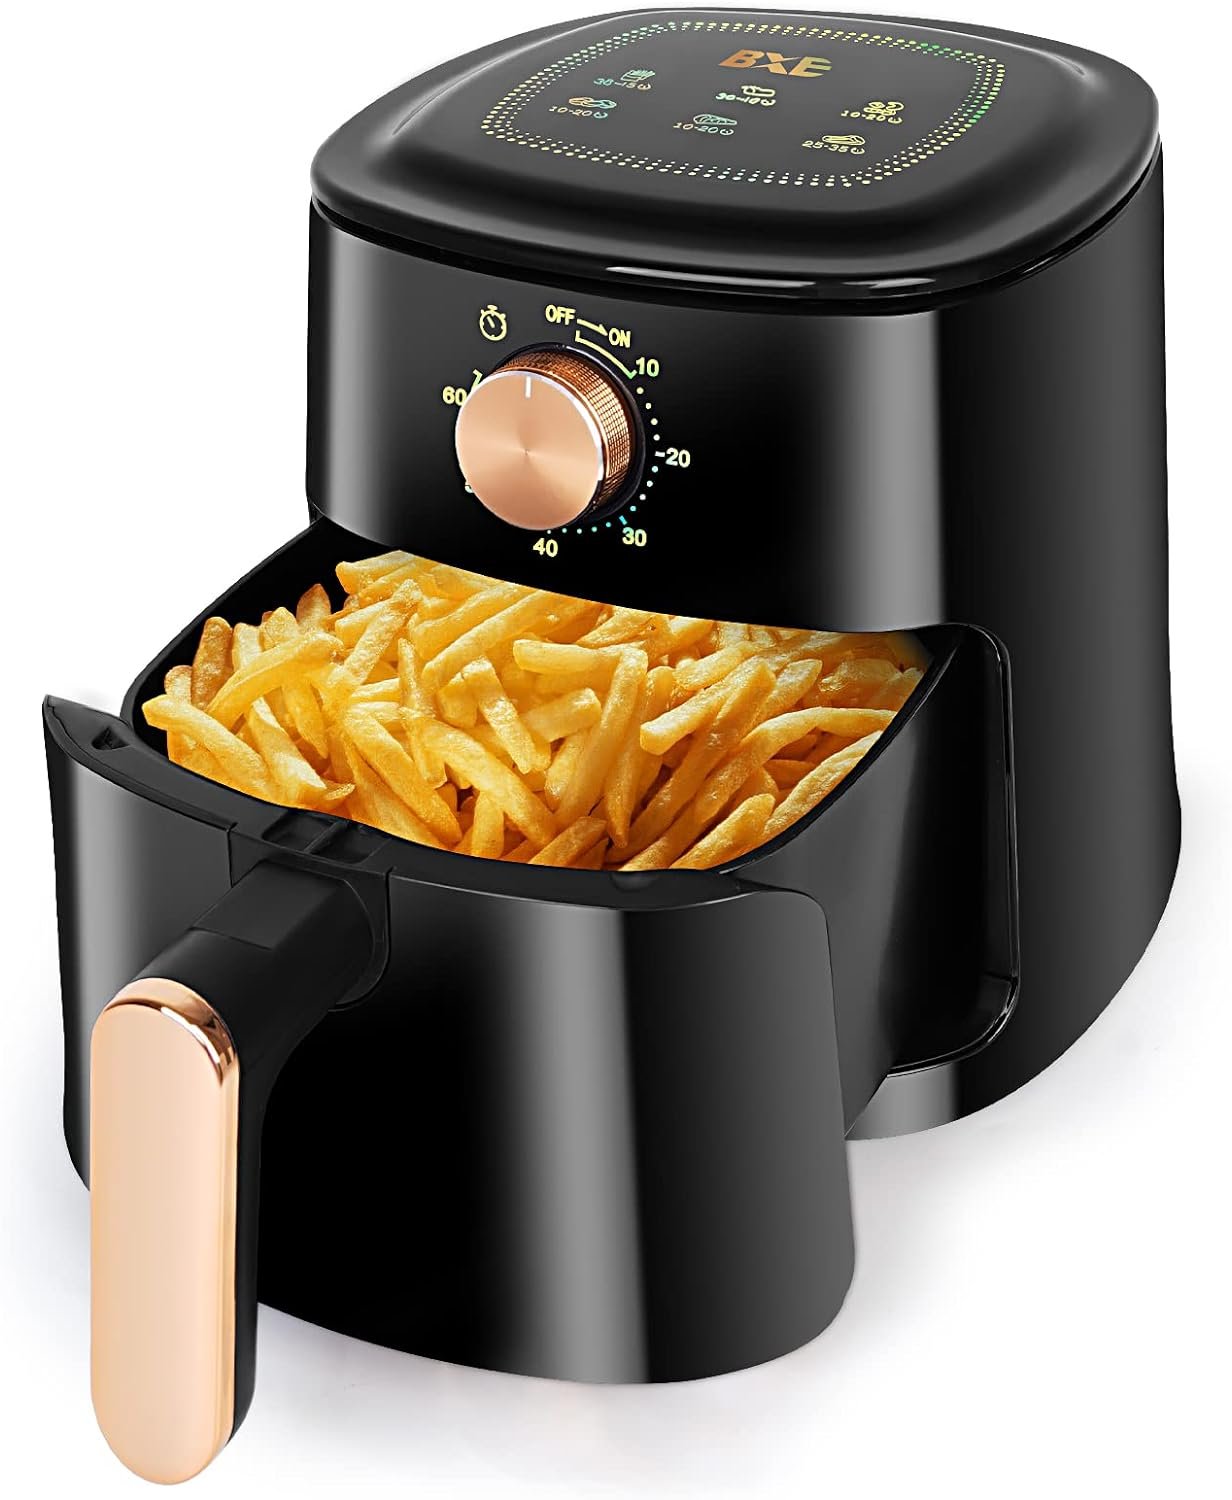 BXE Air Fryer Healthy Oil-Free Cooking Non-Stick Easy To Clean Quiet Operation With Temperature And Time Control 80% Less Oil Ideal For Quick And Easy Meals Black